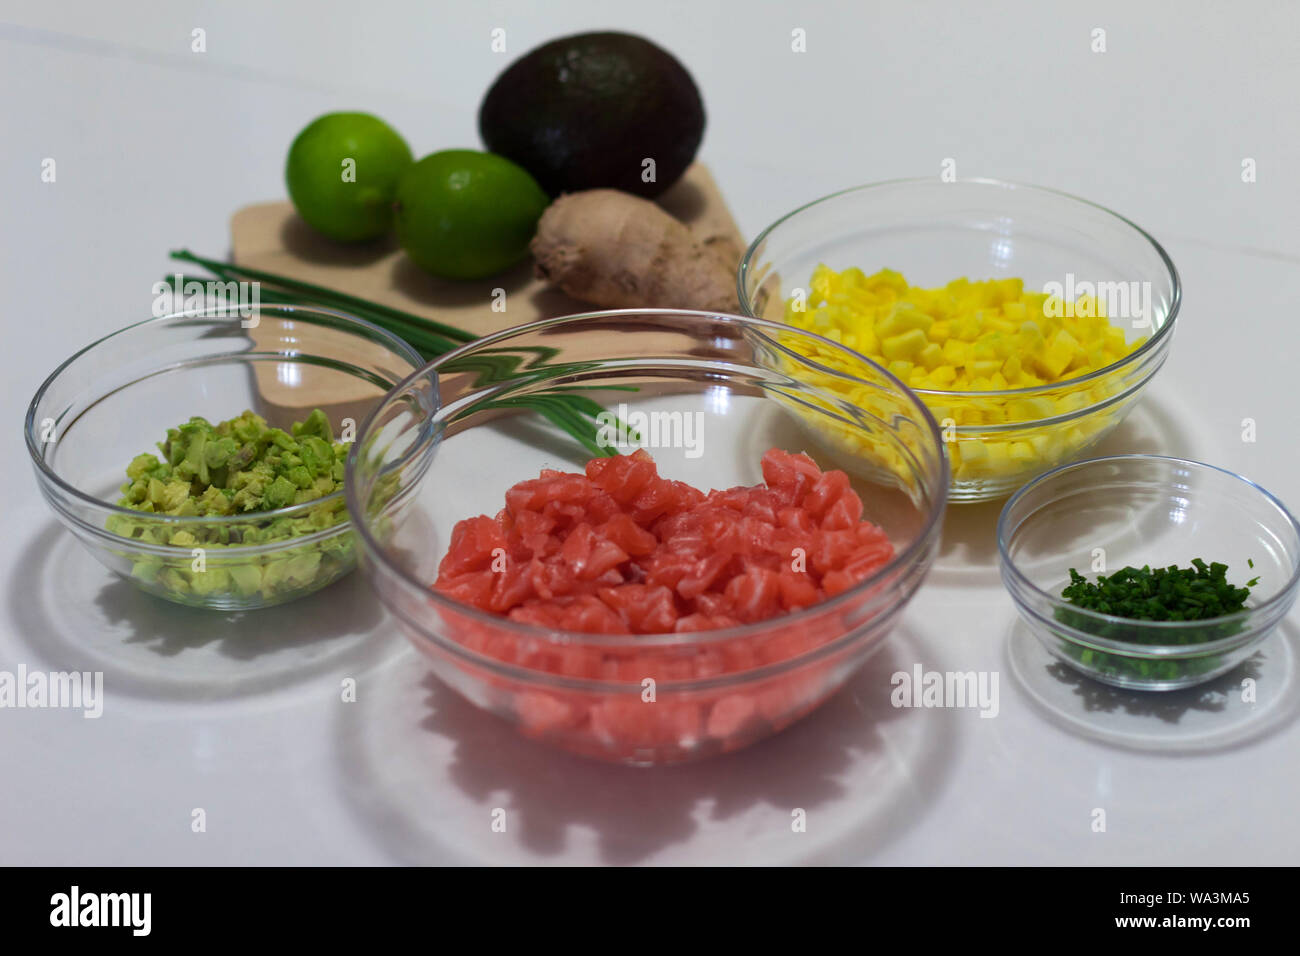 I took this photograph the ingredients chopped and prepared to cook a salmon tartar. These ingredients are avocado, mango, salmon, chives, lime and gi Stock Photo